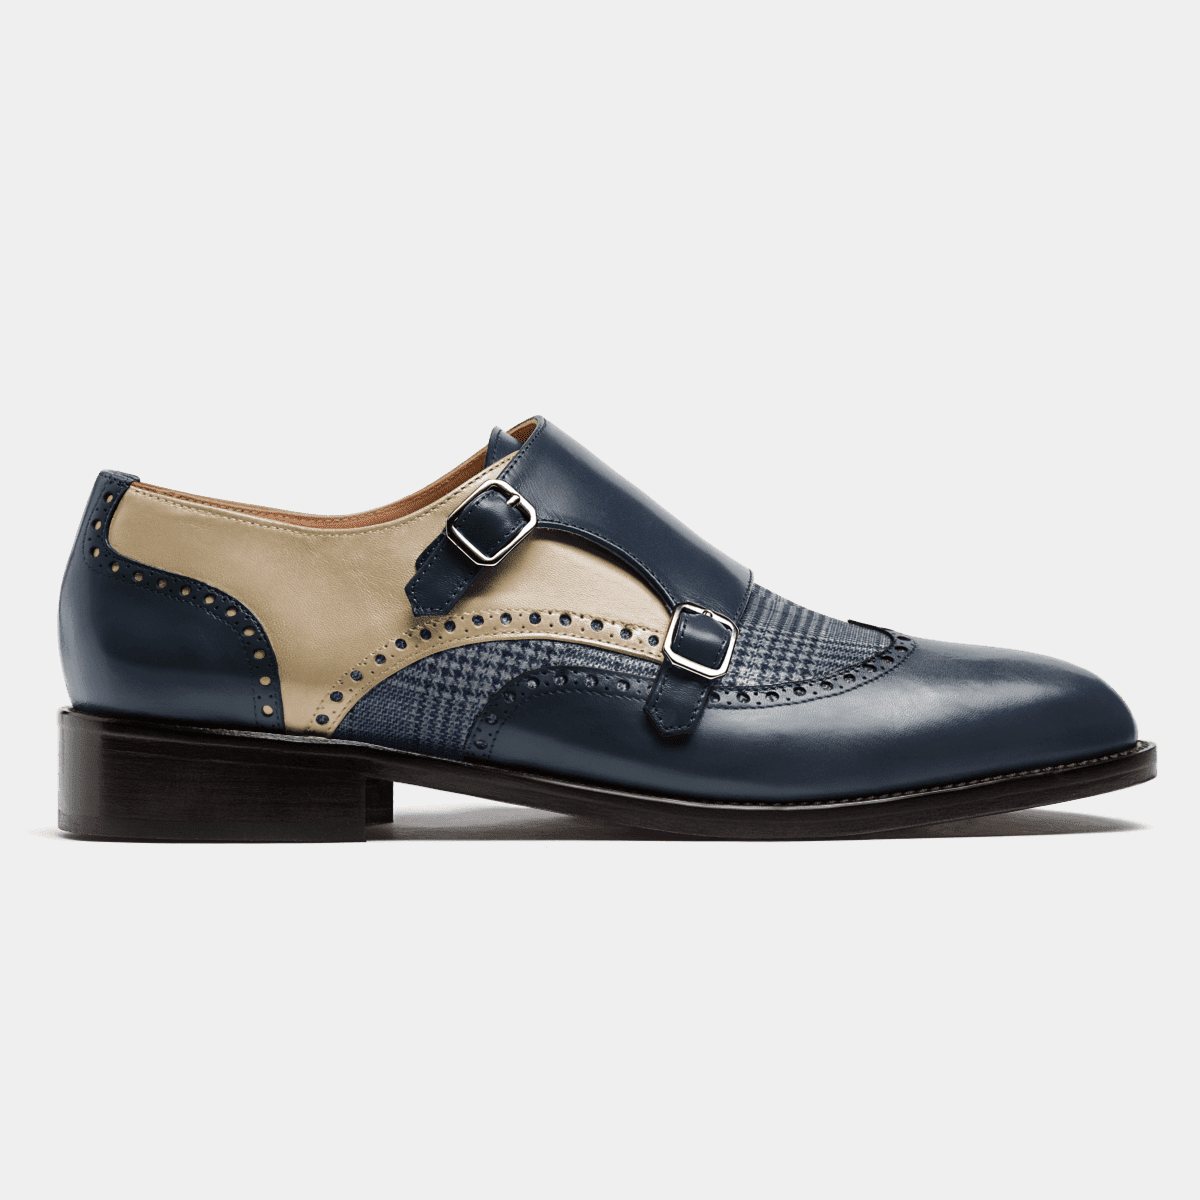 Monk Brogues - blue & white leather & tweed